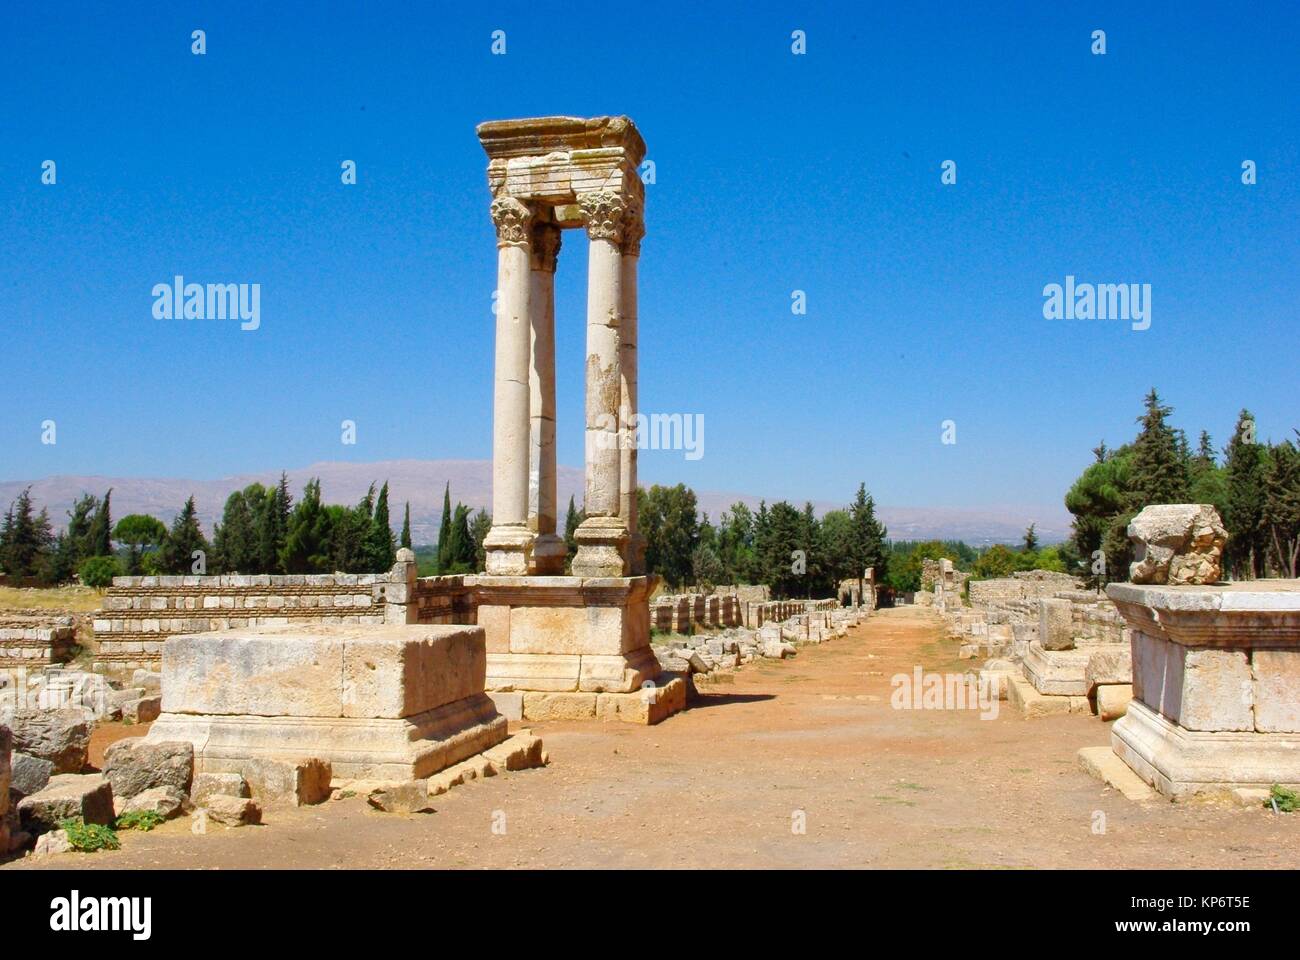 The Omayyad Palace in Aanjar (Haoush Moussa) in Bekaa Valley, Lebanon, situated at the border with Syria Stock Photo